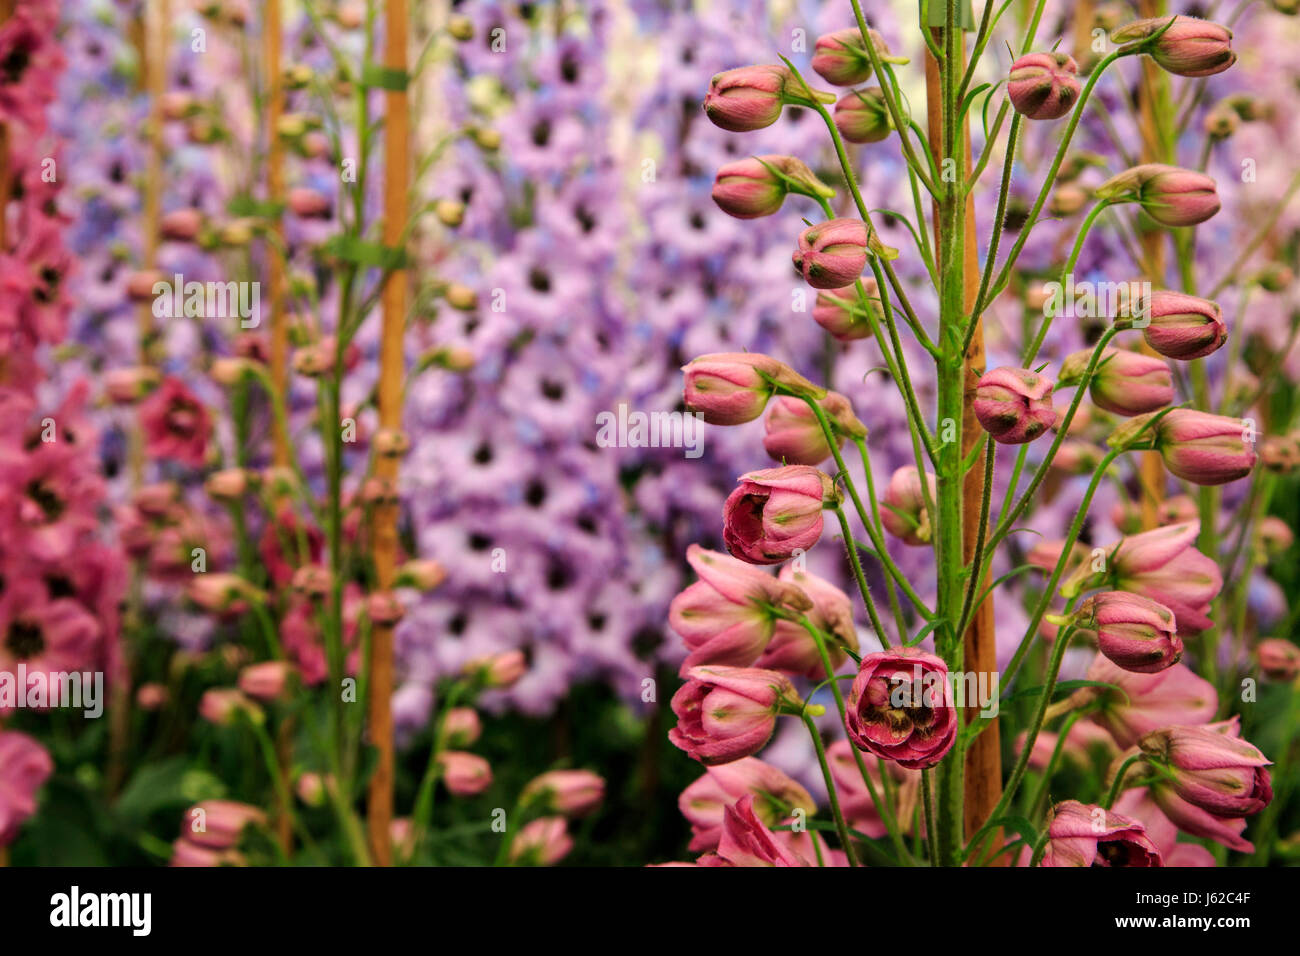 London, UK. 19 May 2017. Delphiniums (Delphinium staphisagria).  Preparations are well under way at the 2017 RHS Chelsea Flower Show which opens to the public on Tuesday. Photo: Vibrant Pictures/Alamy Live News Stock Photo